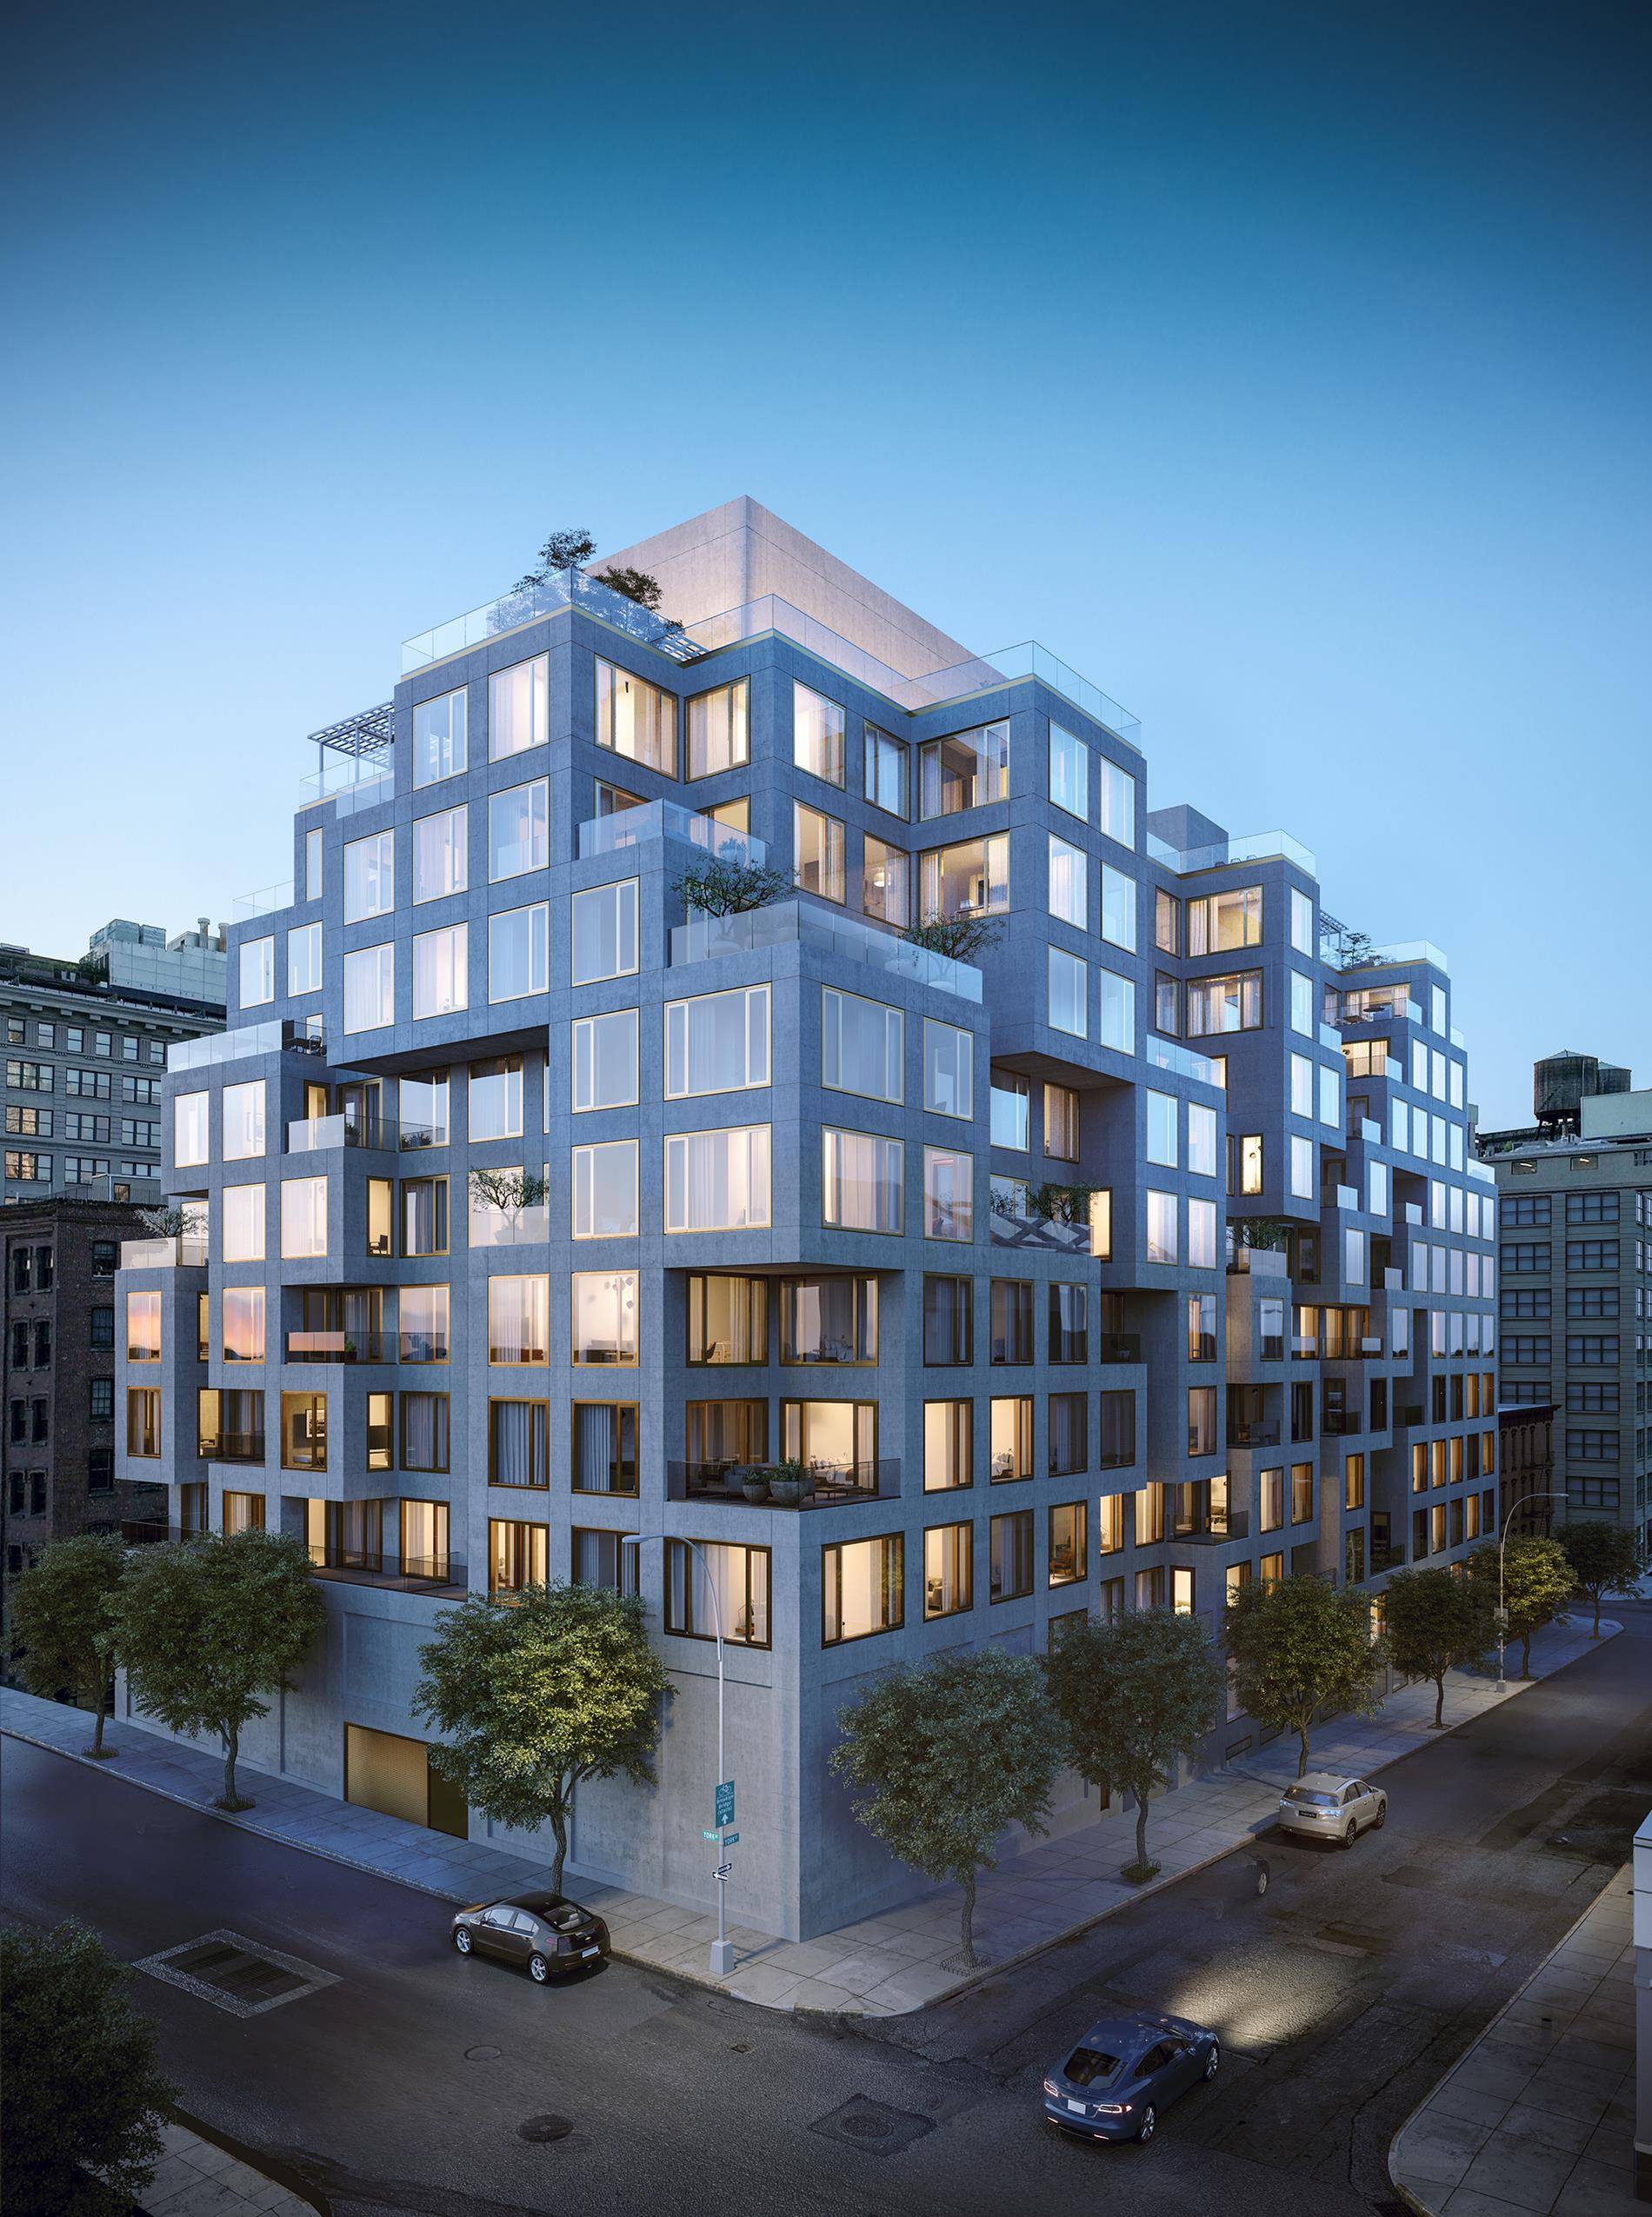 Move in this SpringOnly 5 Down at Contract SigningConstruction entrance on York and Adams StreetThese thoughtfully designed one bedroom homes are a sanctuary from the world, providing comfort and luxury ...